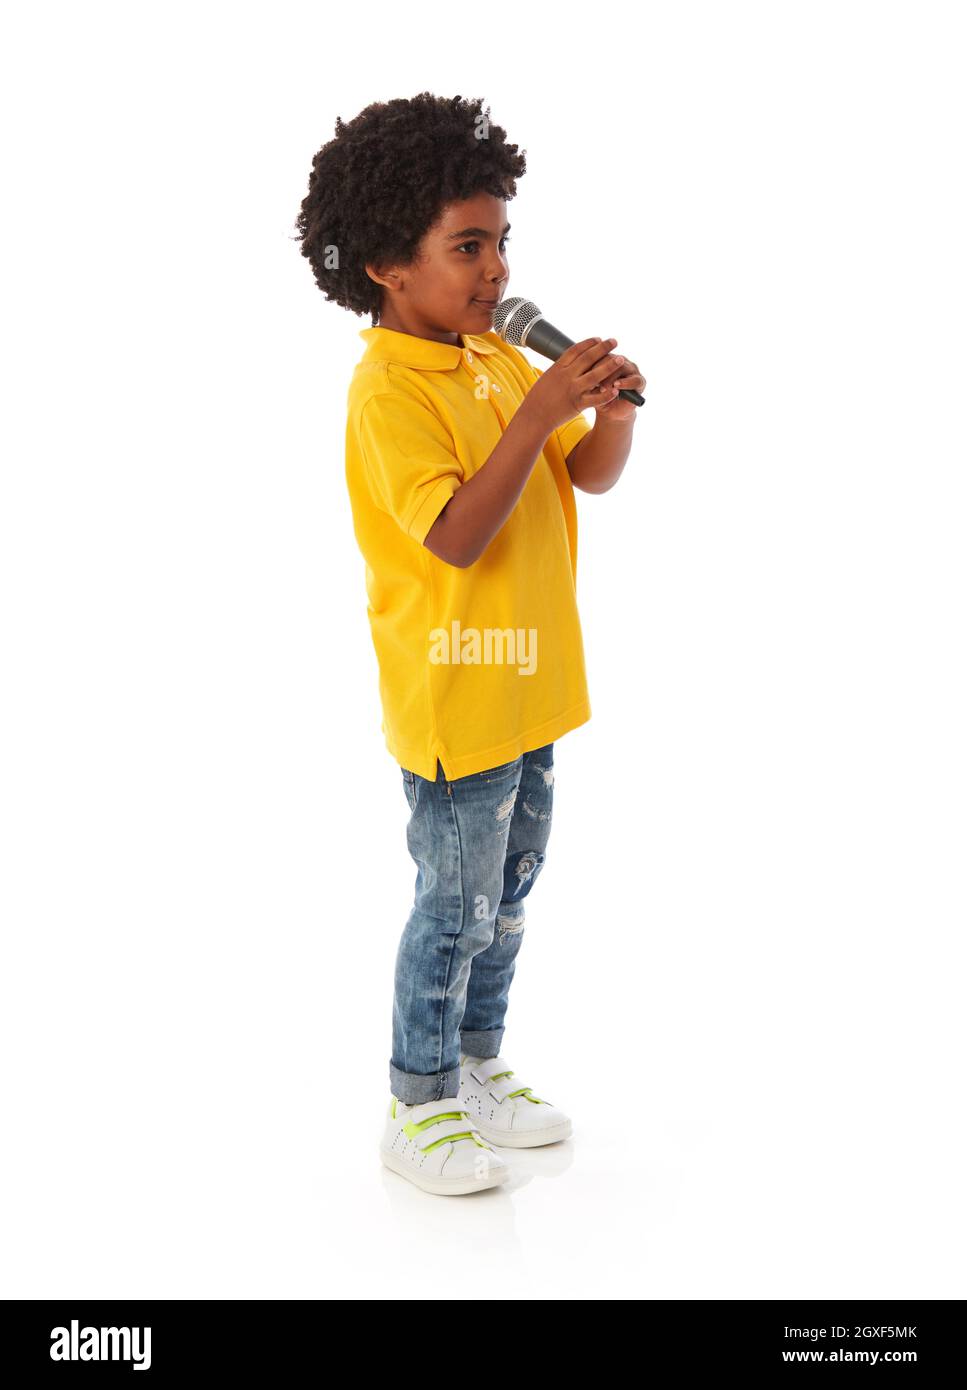 Afican-american kid with microphone on white background Stock Photo